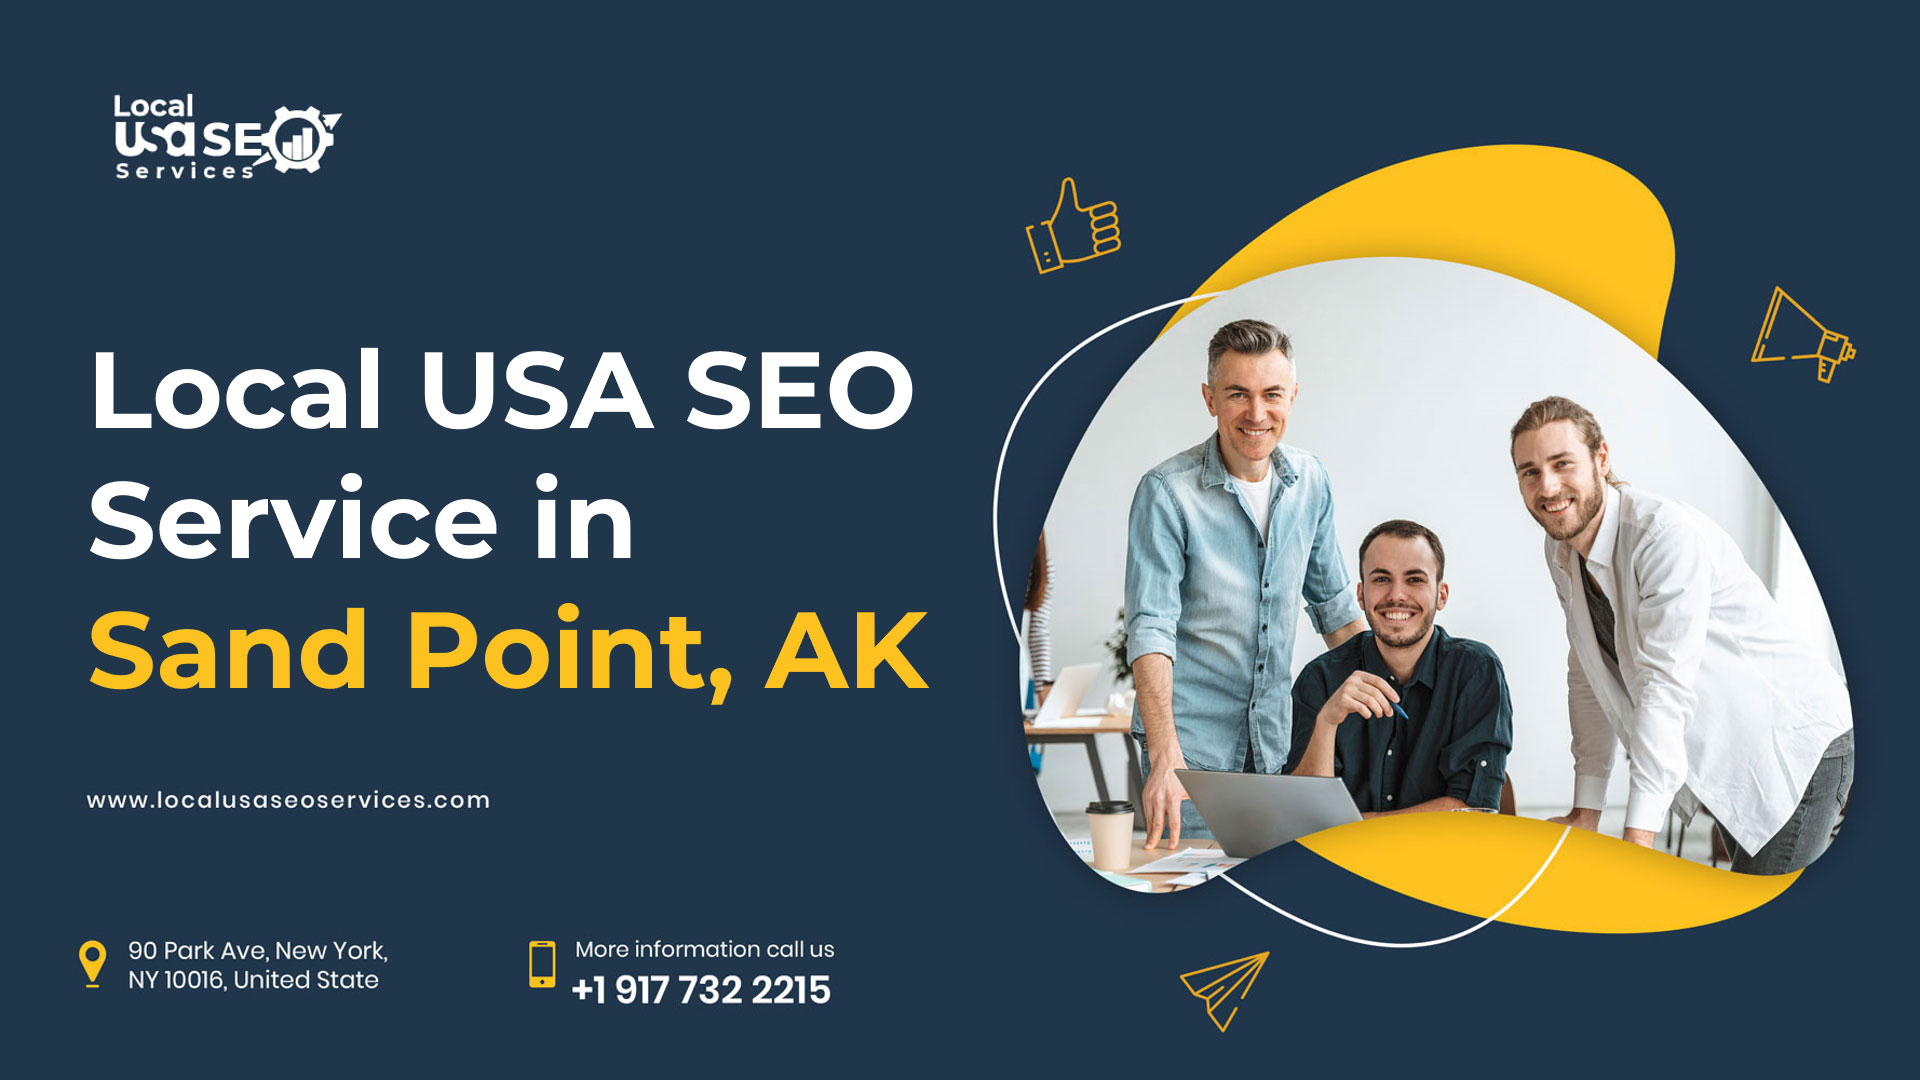 Local USA SEO Service in Sand Point, AK